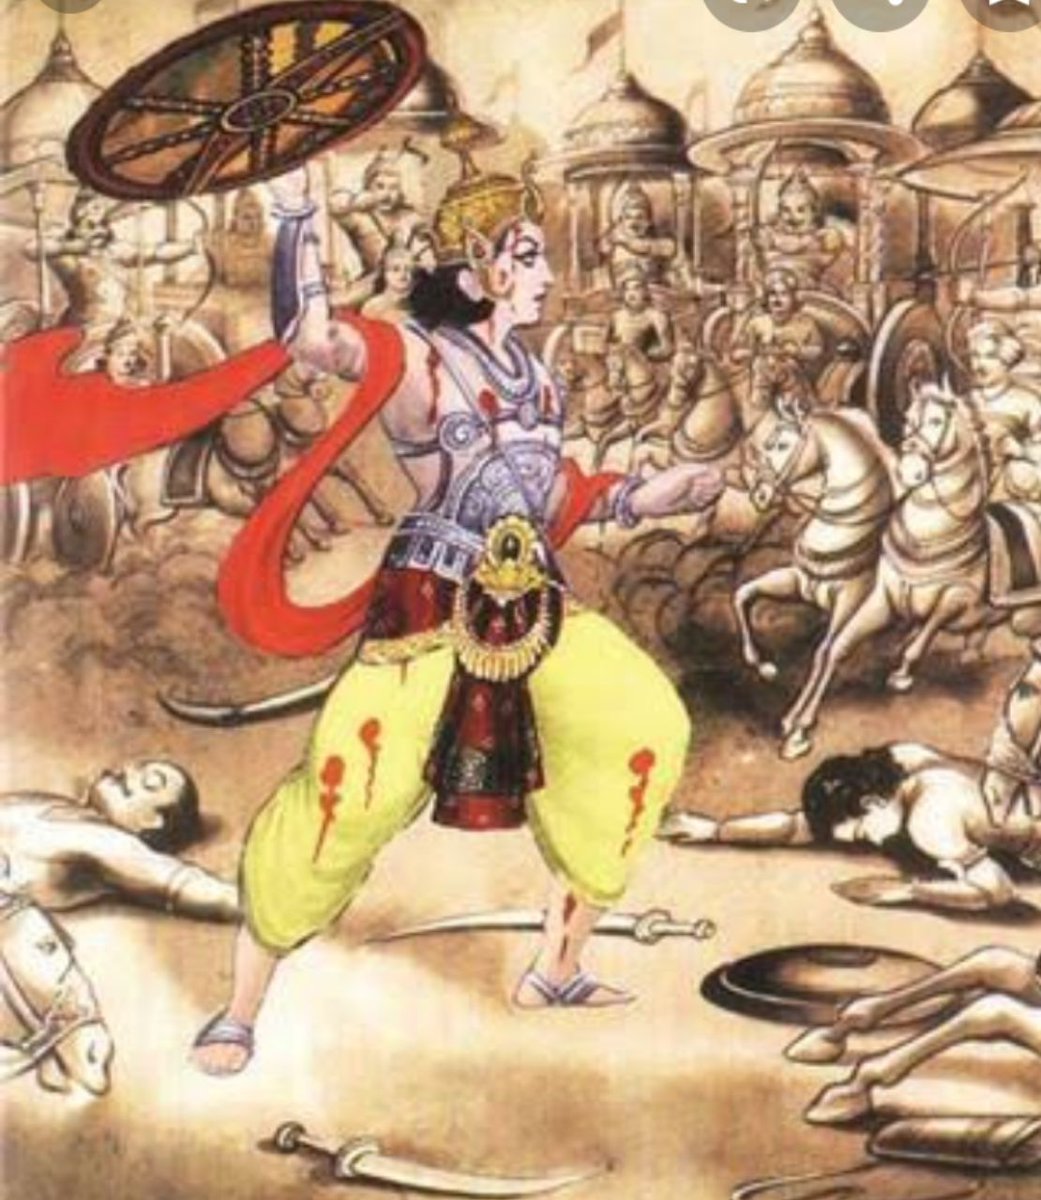 These Maharathi broke his Bow. They broke his Sword and Chakra. He then destroyed Chariot of Ashwasthama with his Gada. Then Son of Dushashan k!lled him with his Gada. Abhimanyu was definitely most Powerful Warrior of his generation.